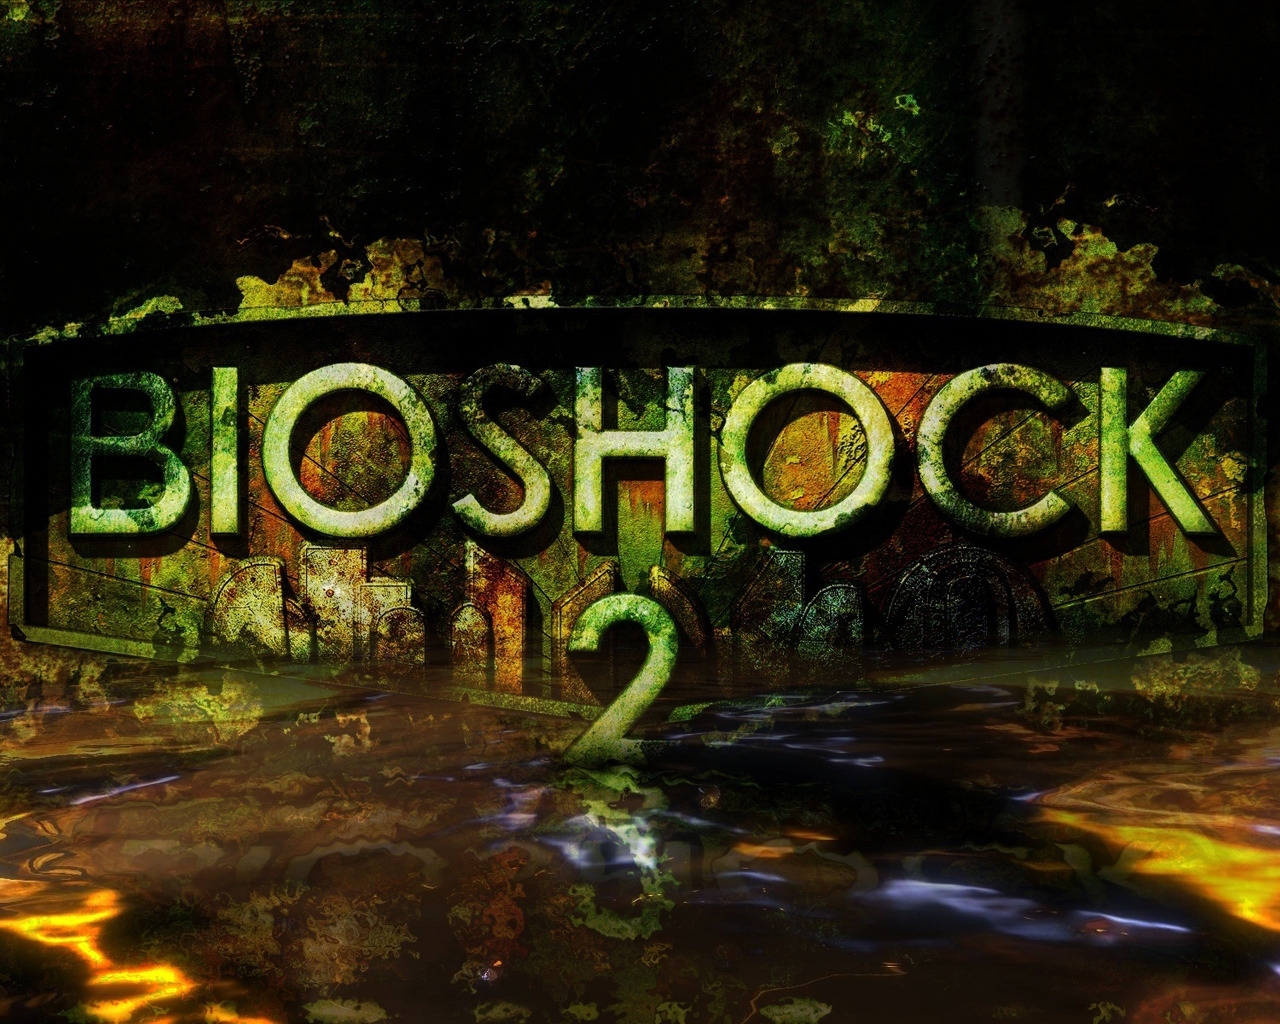 Bioshock 2 Video Game for 1280 x 1024 resolution